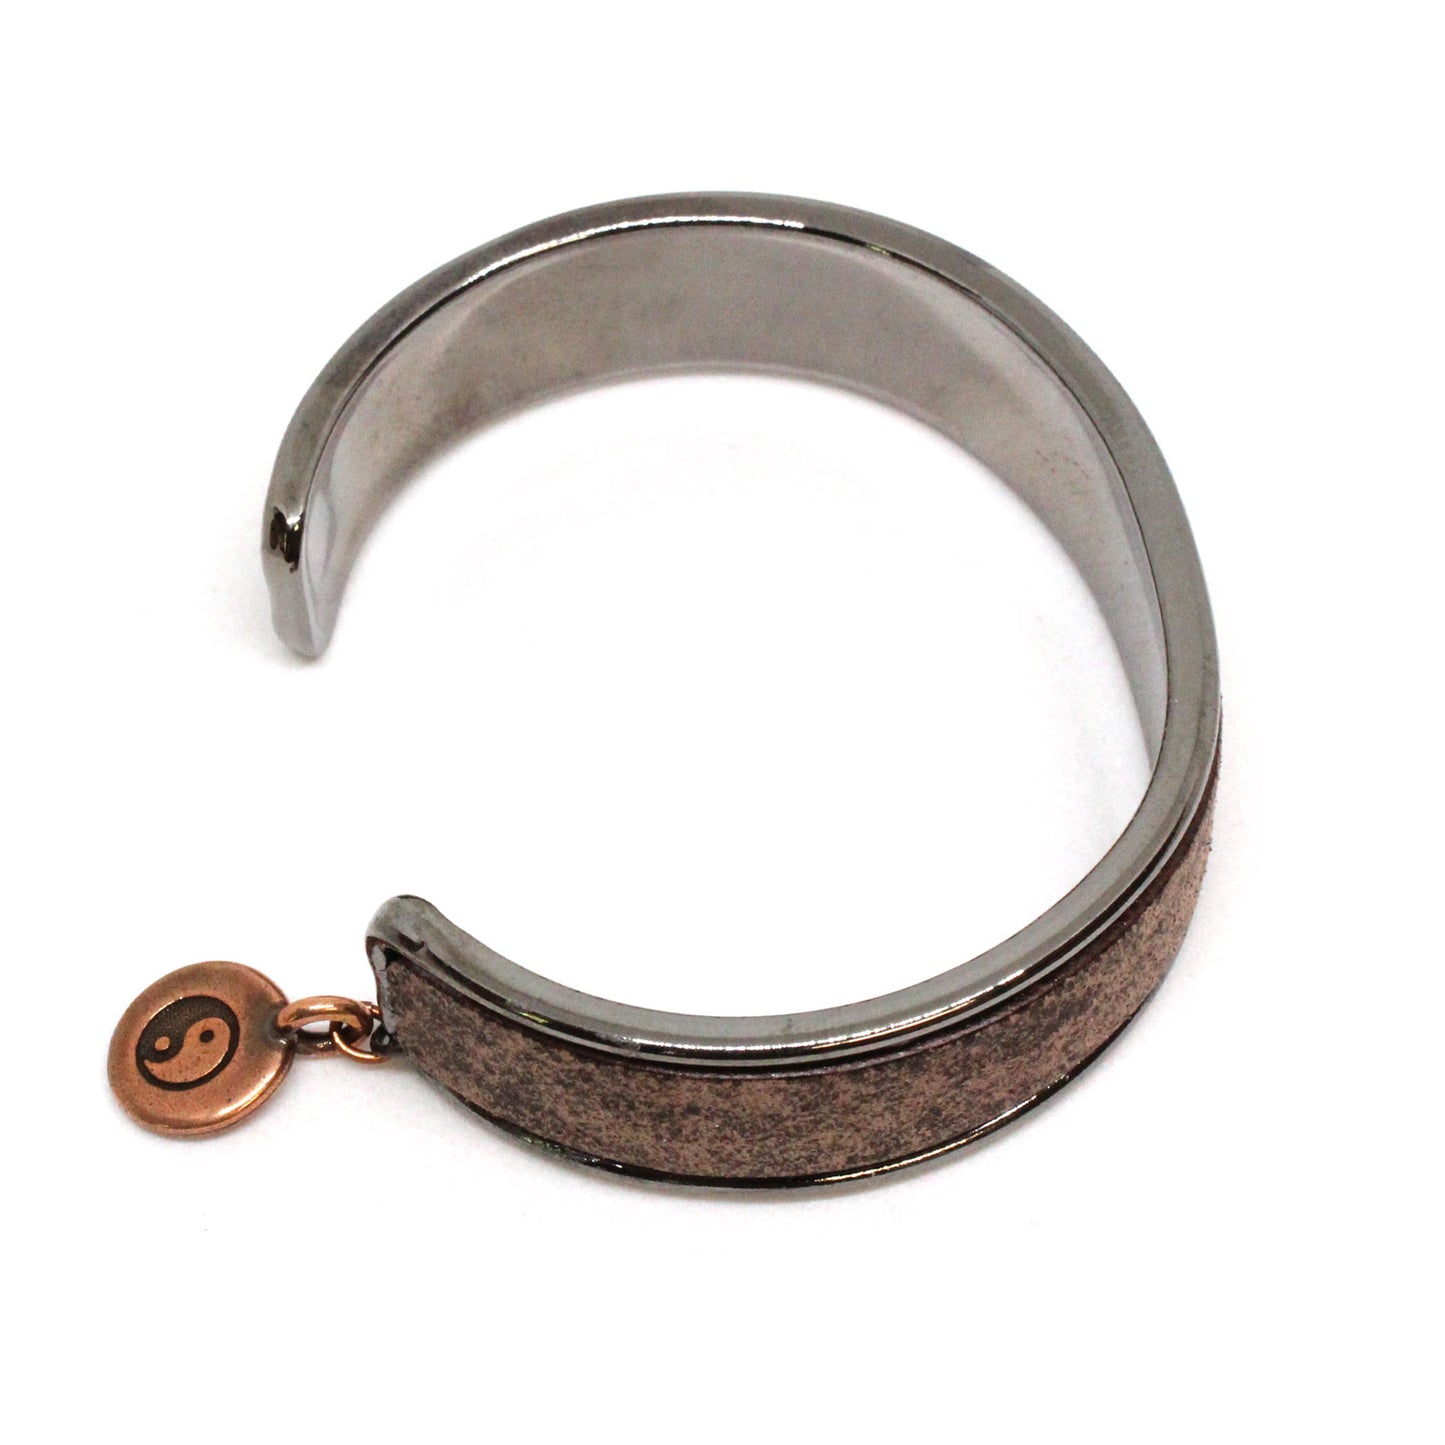 Distressed Chocolate Brown Cuff Bracelet / fits up to 7 inch wrist size / Euro leather on gunmetal black cuff / yin yang charm